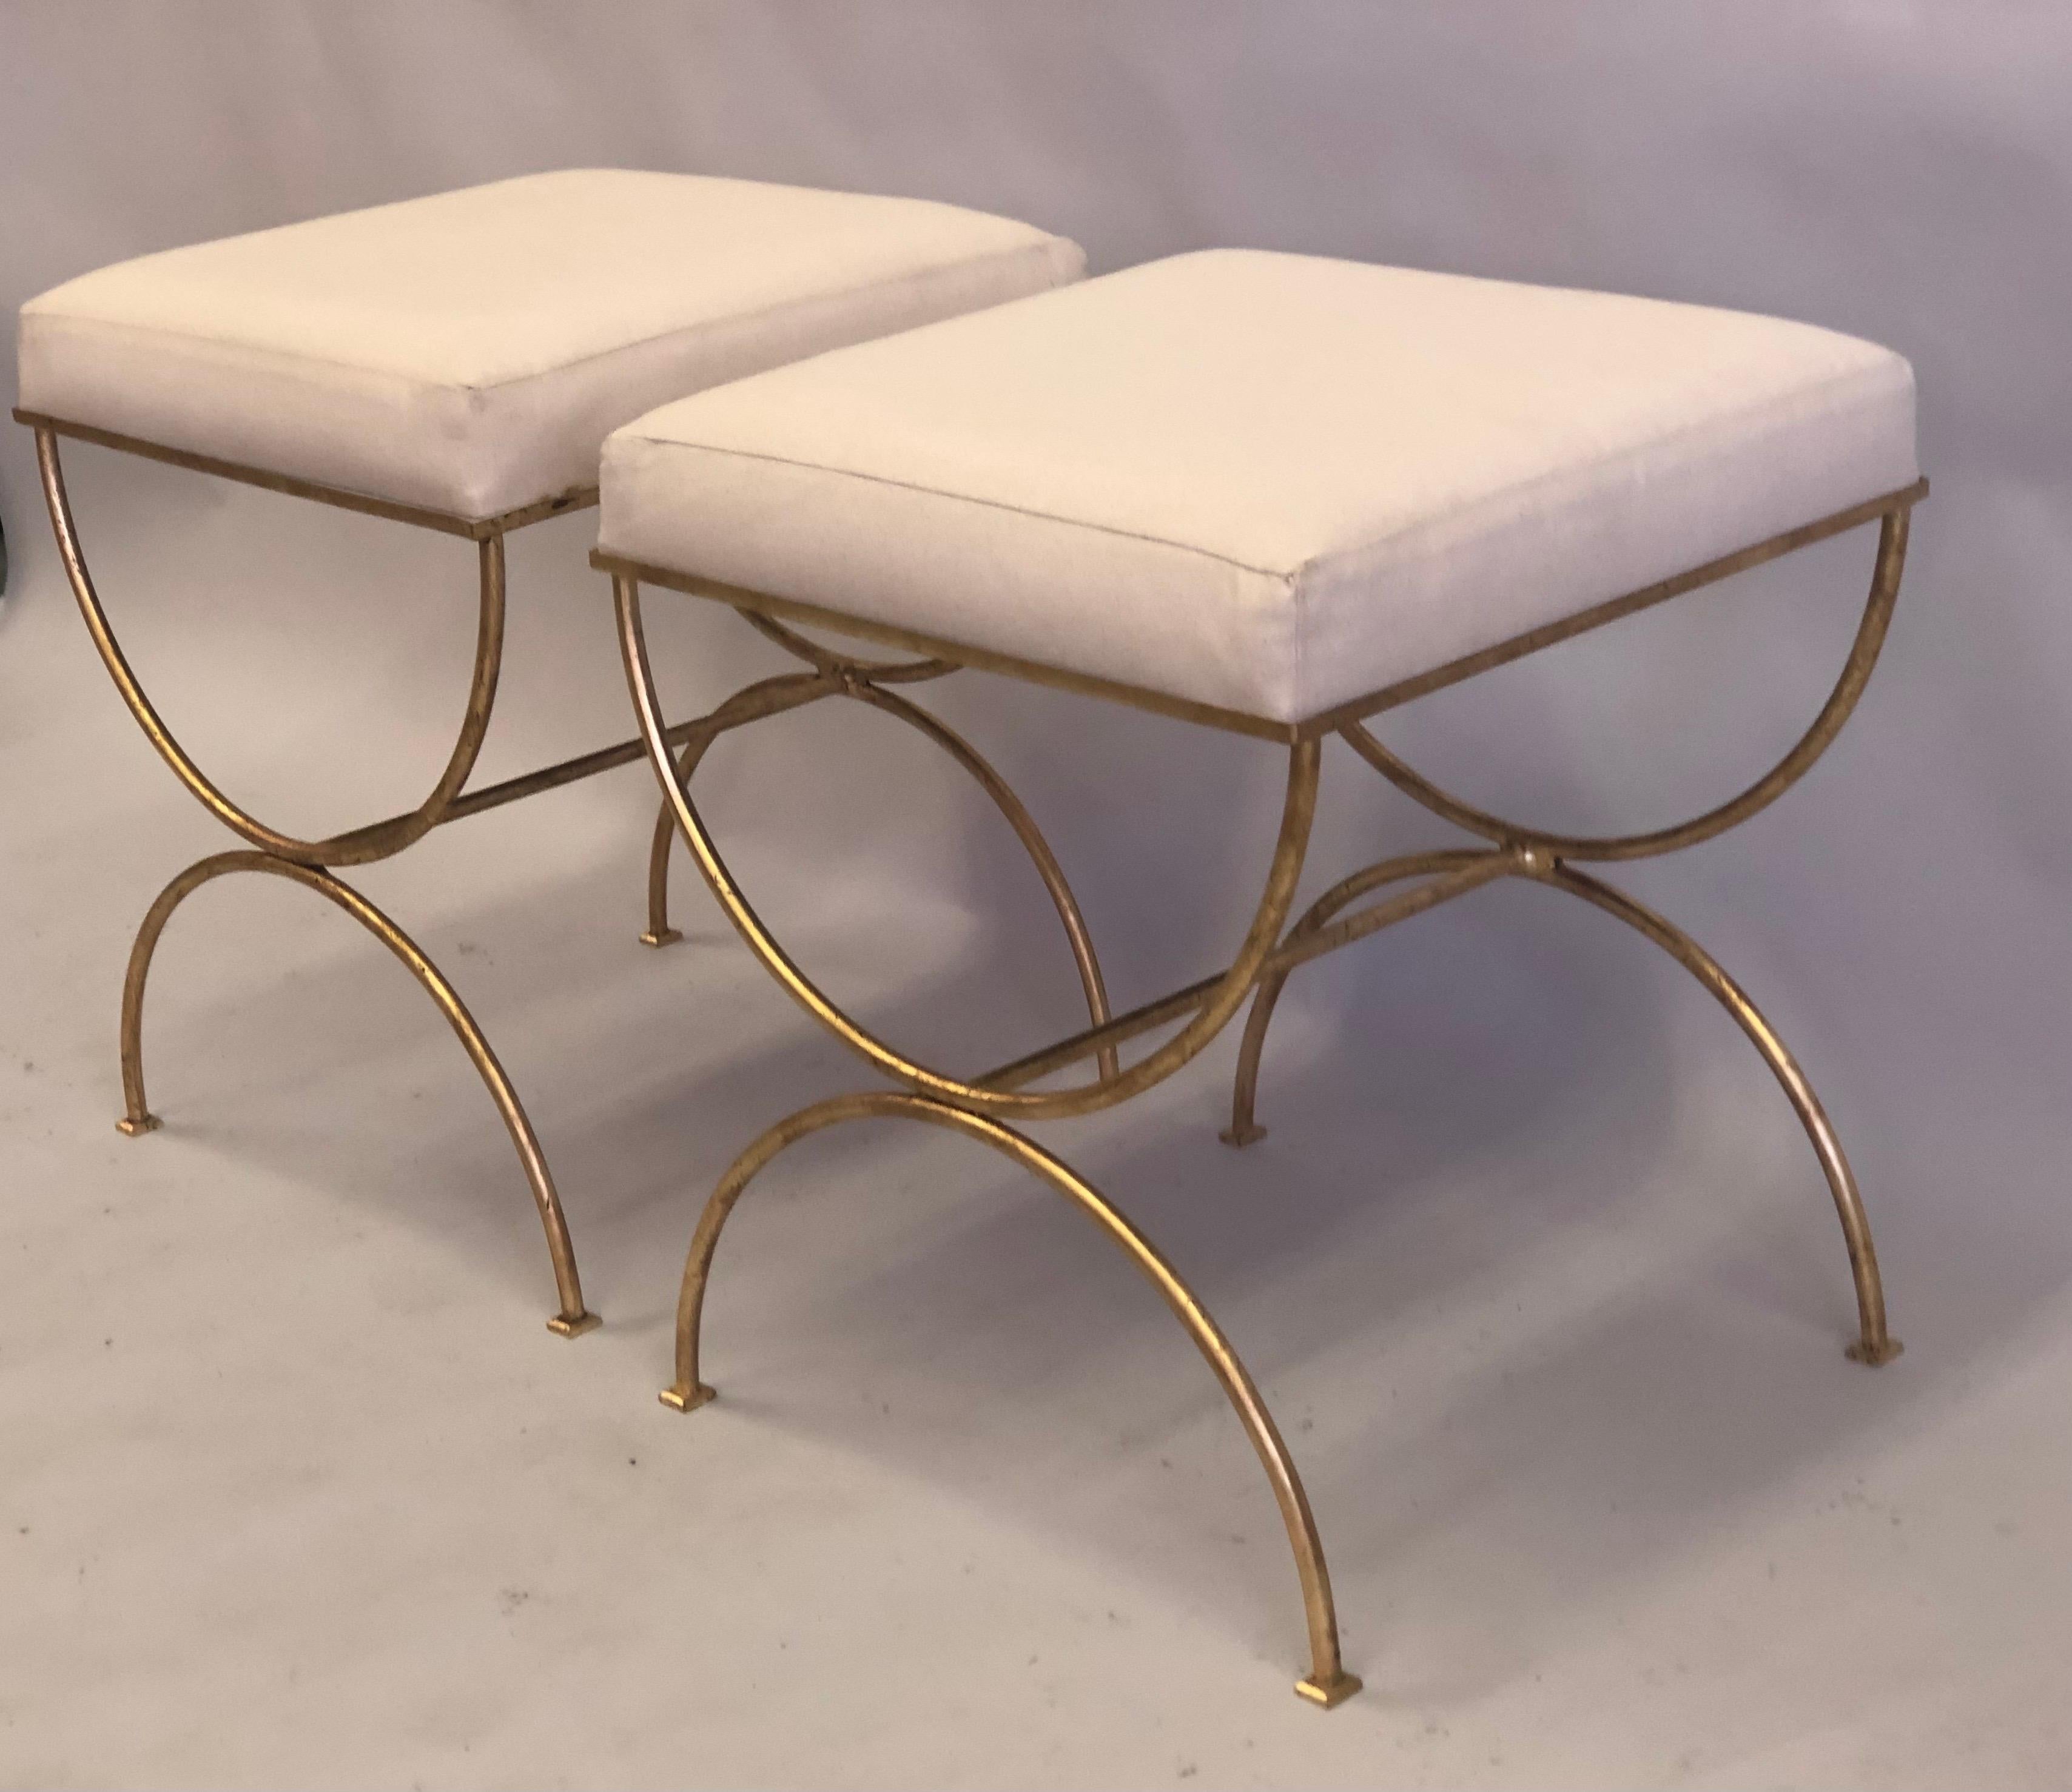 Wrought Iron Pair French Modern Neoclassical Gilt Iron Benches, Style of Jean-Michel Frank For Sale